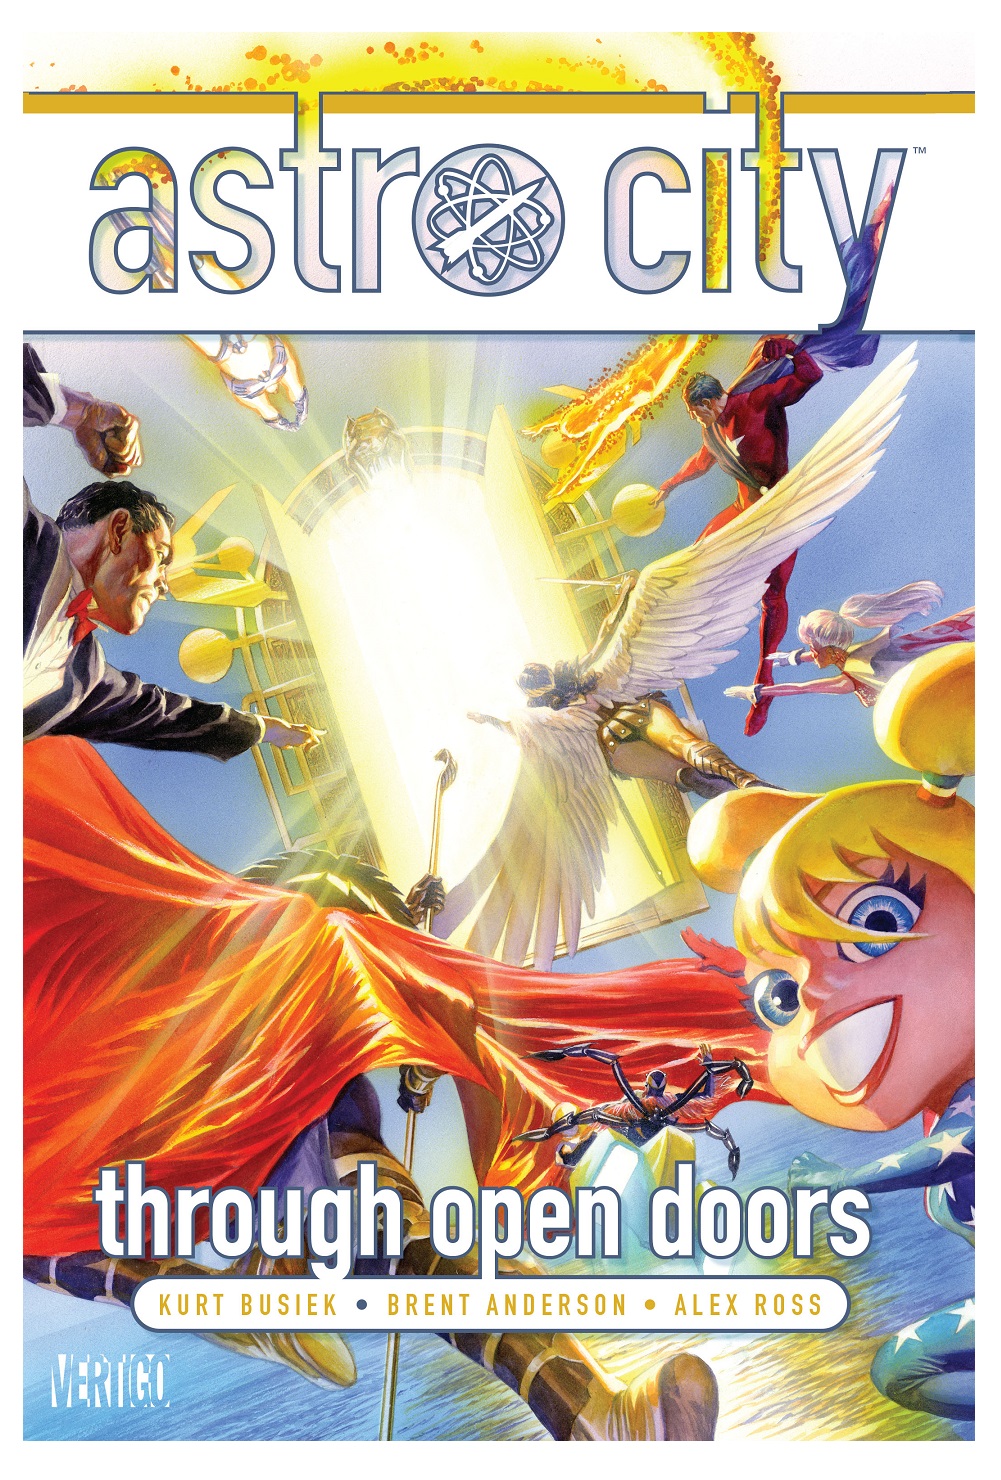 Astro City Cover by Alex Ross